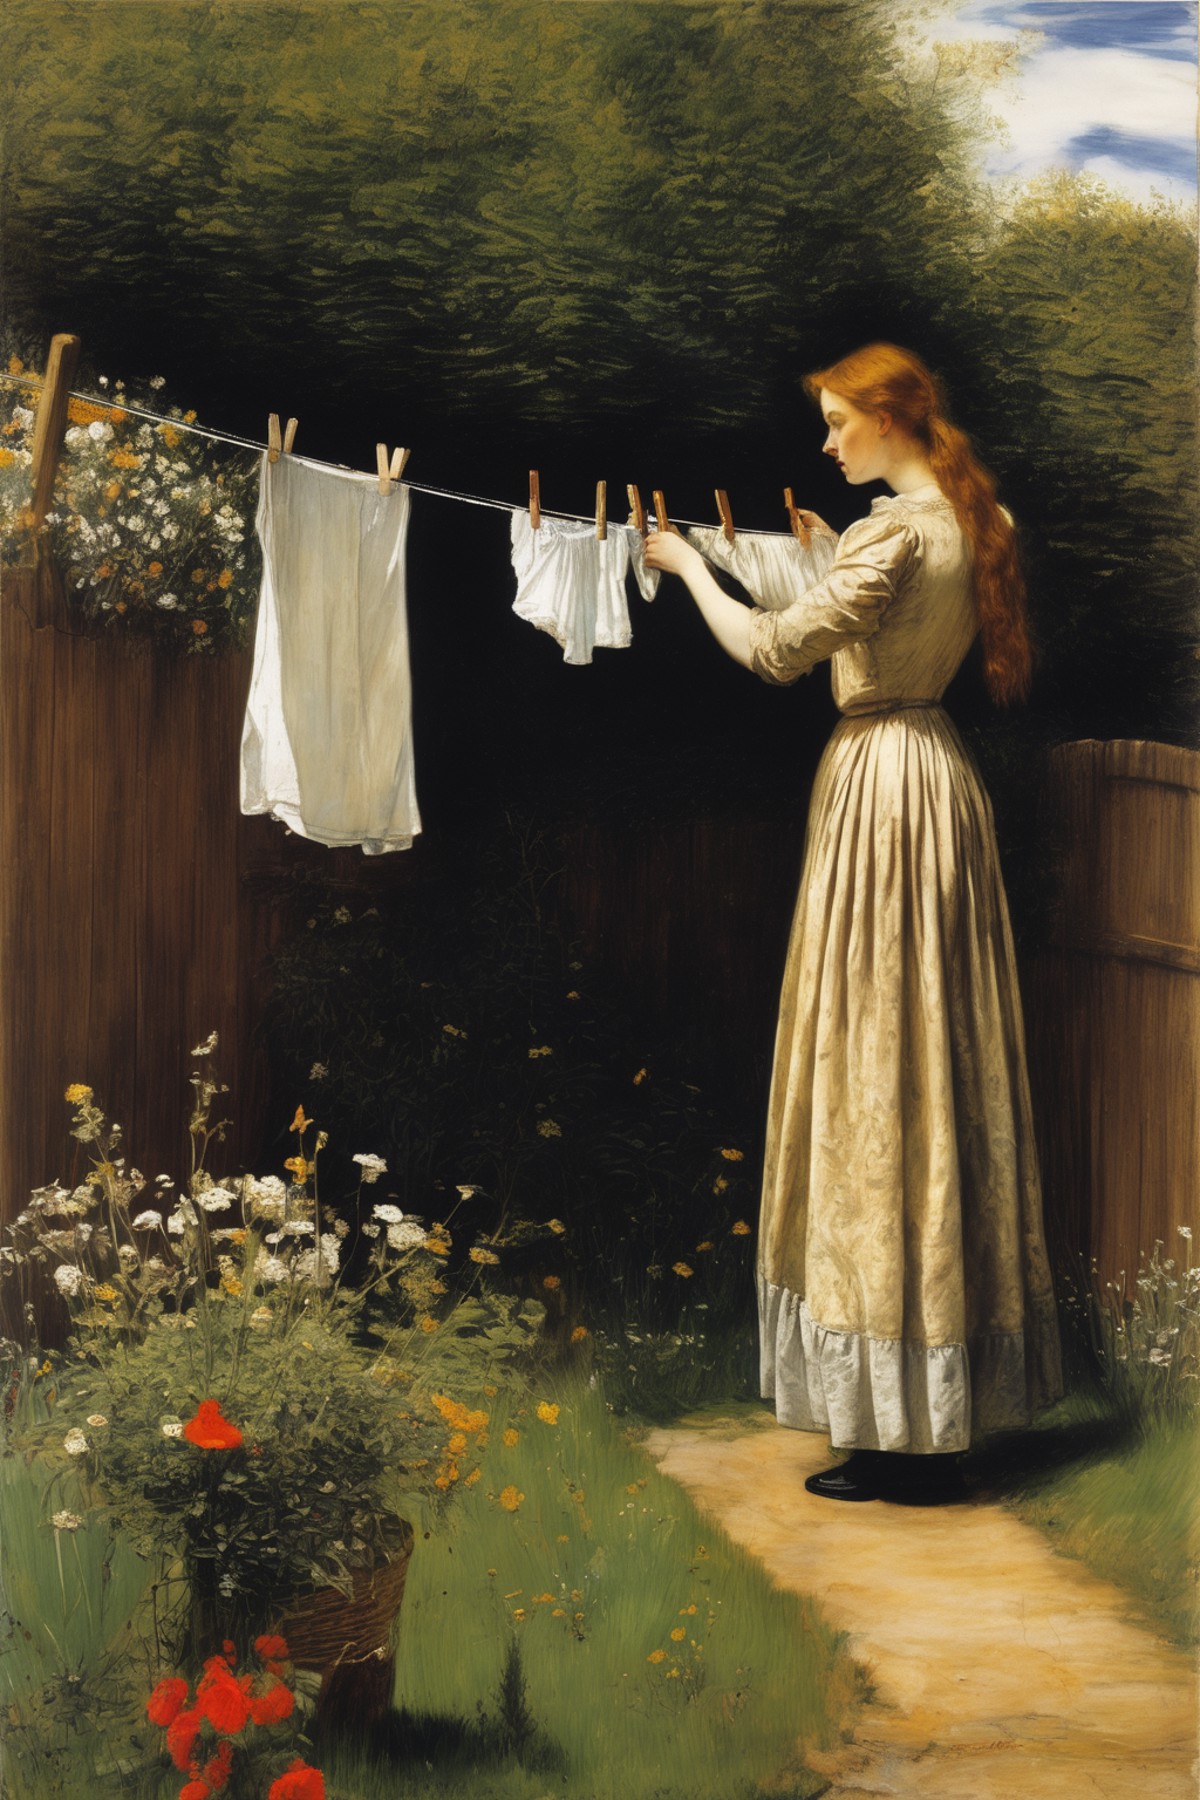 John Everett Millais Style - woman in a flowing velvet dress hanging laundry outside to dry on a clothesline, child pickin...